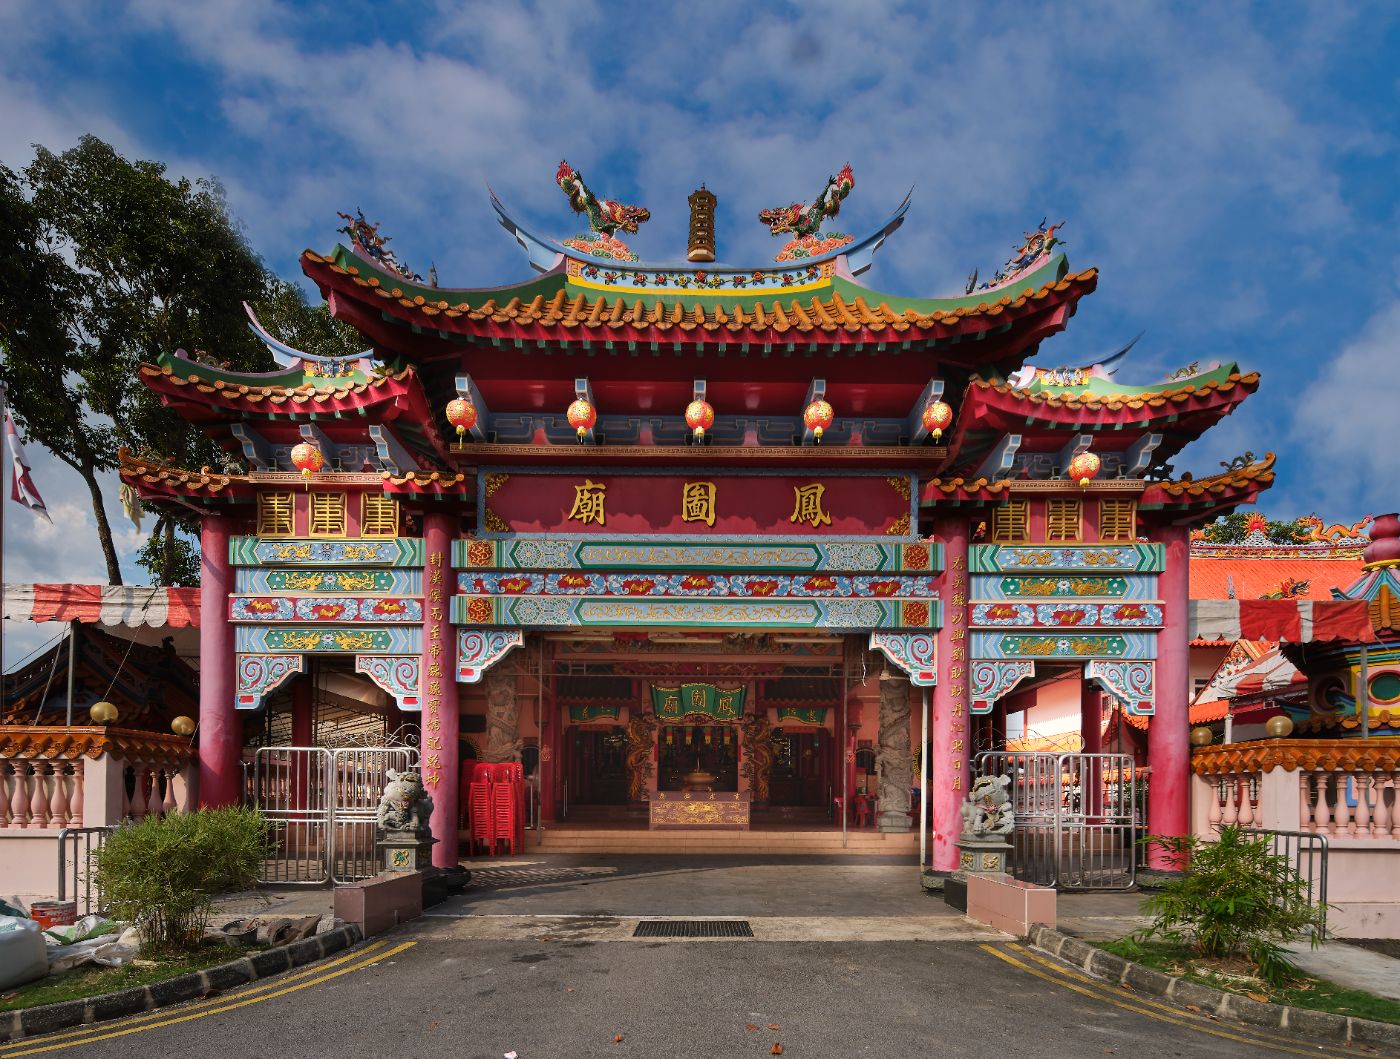 Hong Tho Bilw Temple, also commonly known as Feng Tu Miao, is dedicated to Guan Di Gong, a god of war and wealth. The original temple was built in the 1940s in Kampong Hock Choon.